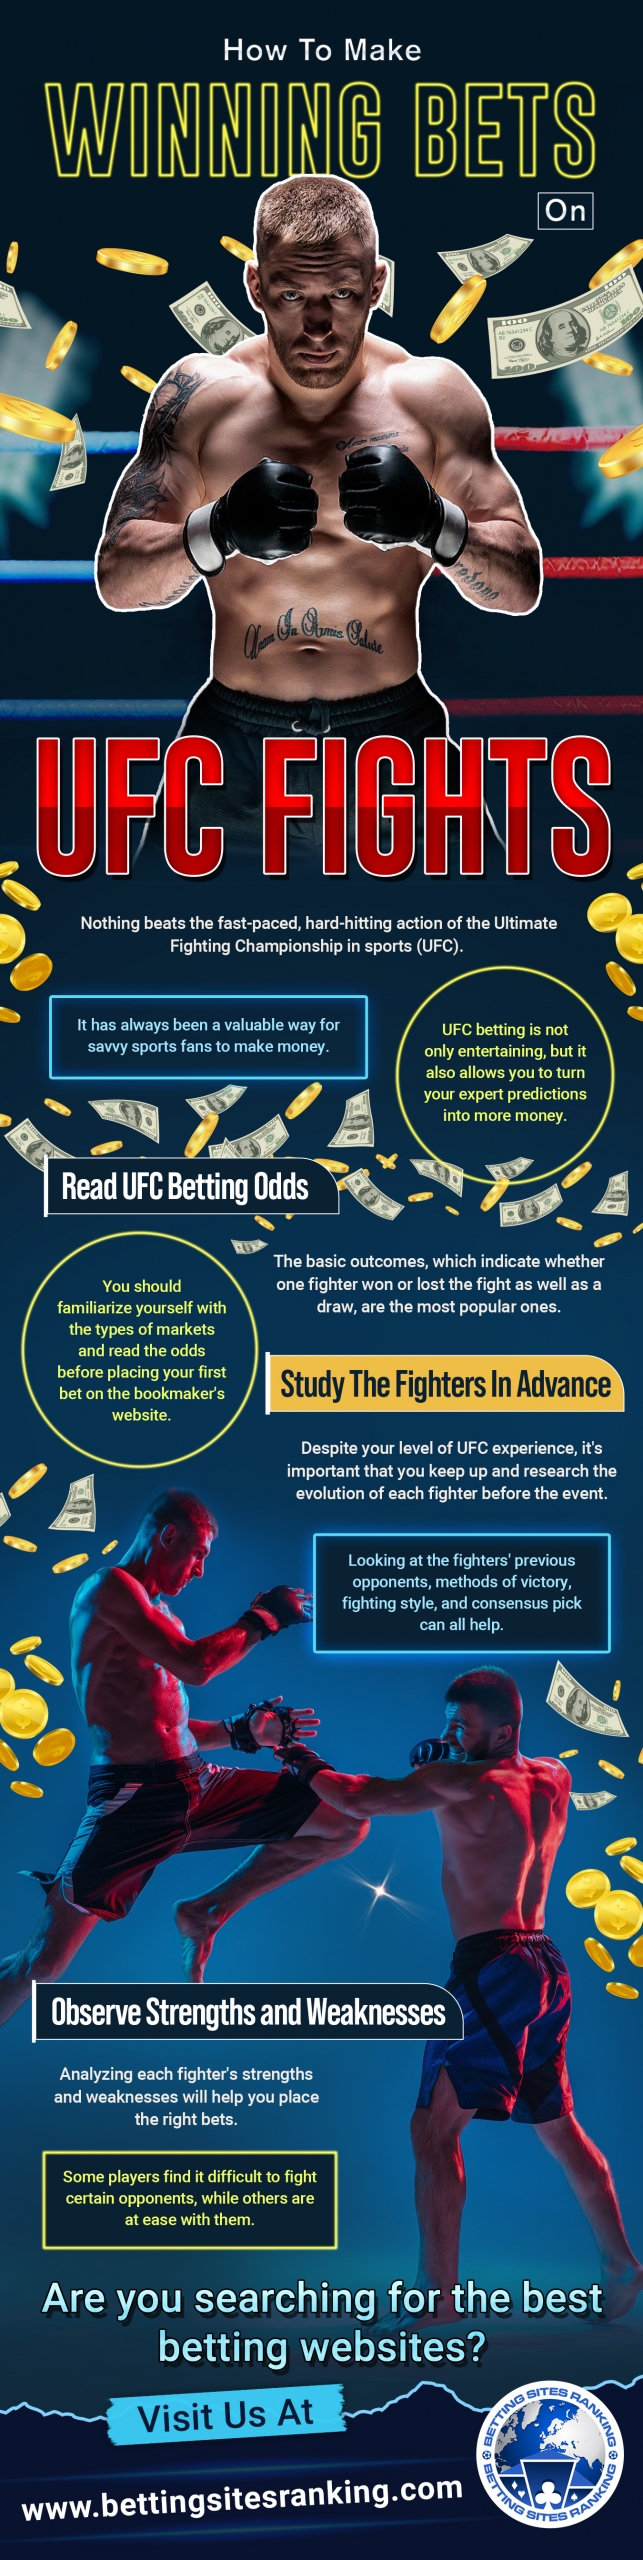 How To Make Winning Bets On UFC Fights